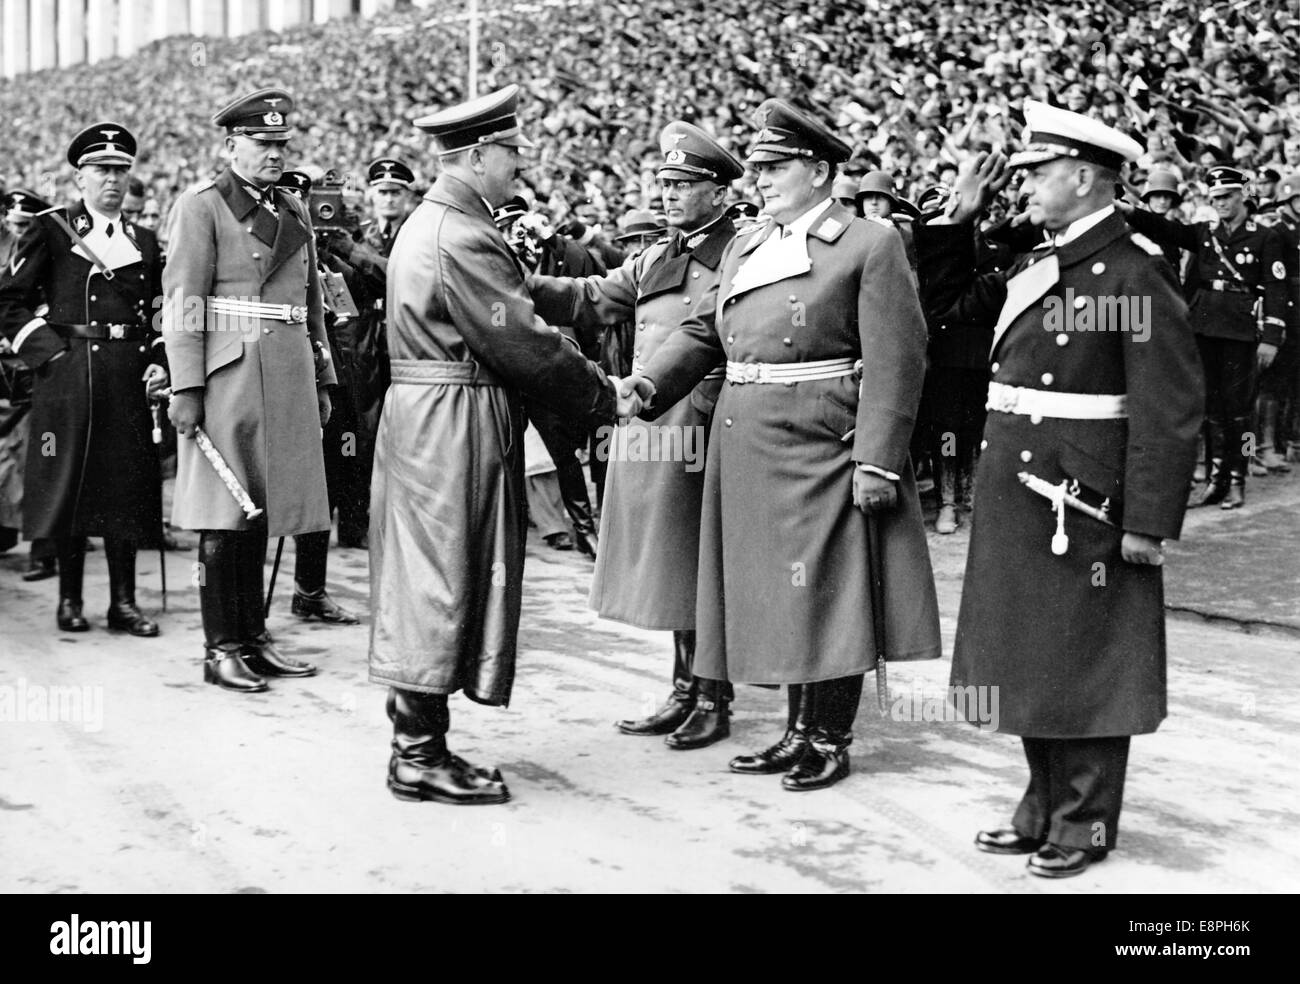 Nuremberg Rally 1937 in Nuremberg, Germany - Nazi party rally grounds - Adolf Hitler greets the commanders-in-chief of the branches of the German Wehrmacht (armed forces) on the occasion of the Wehrmacht demonstrations on Zeppelin Field. L-R General admiral Erich Raeder, colonel general Hermann Goering and colonel general Freiherr Werner von Fritsch. To the left of Hitler: Reich Minister of War field marshal Werner von Blomberg (2-L) and chief aid and adjutant of Hitler Julius Schaub (L). (Flaws in quality due to the historic picture copy) Fotoarchiv für Zeitgeschichtee - NO WIRE SERVICE - Stock Photo